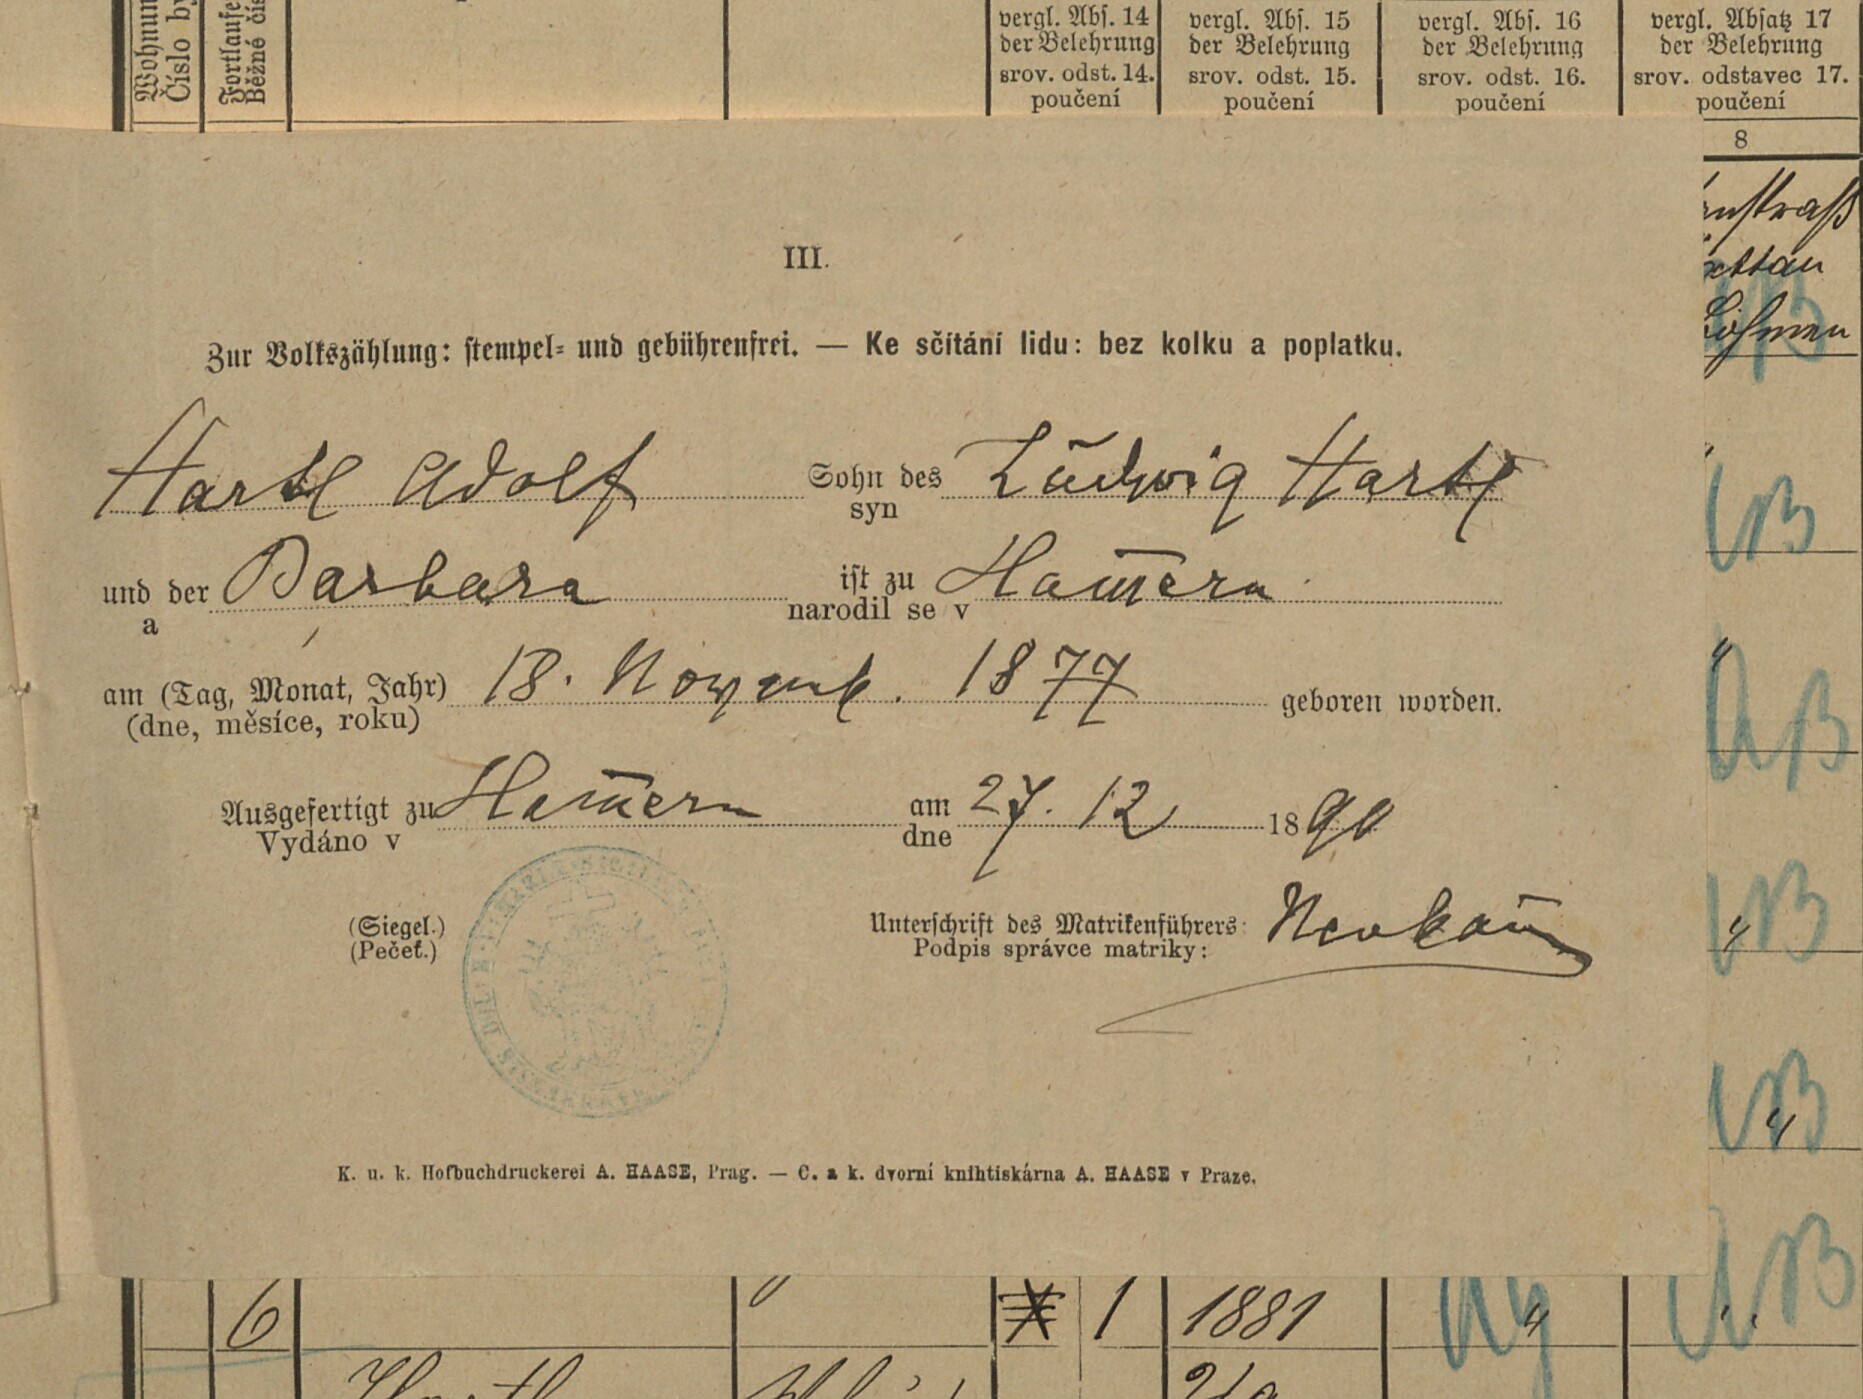 3. soap-kt_01159_census-1890-hamry-cp131_0030